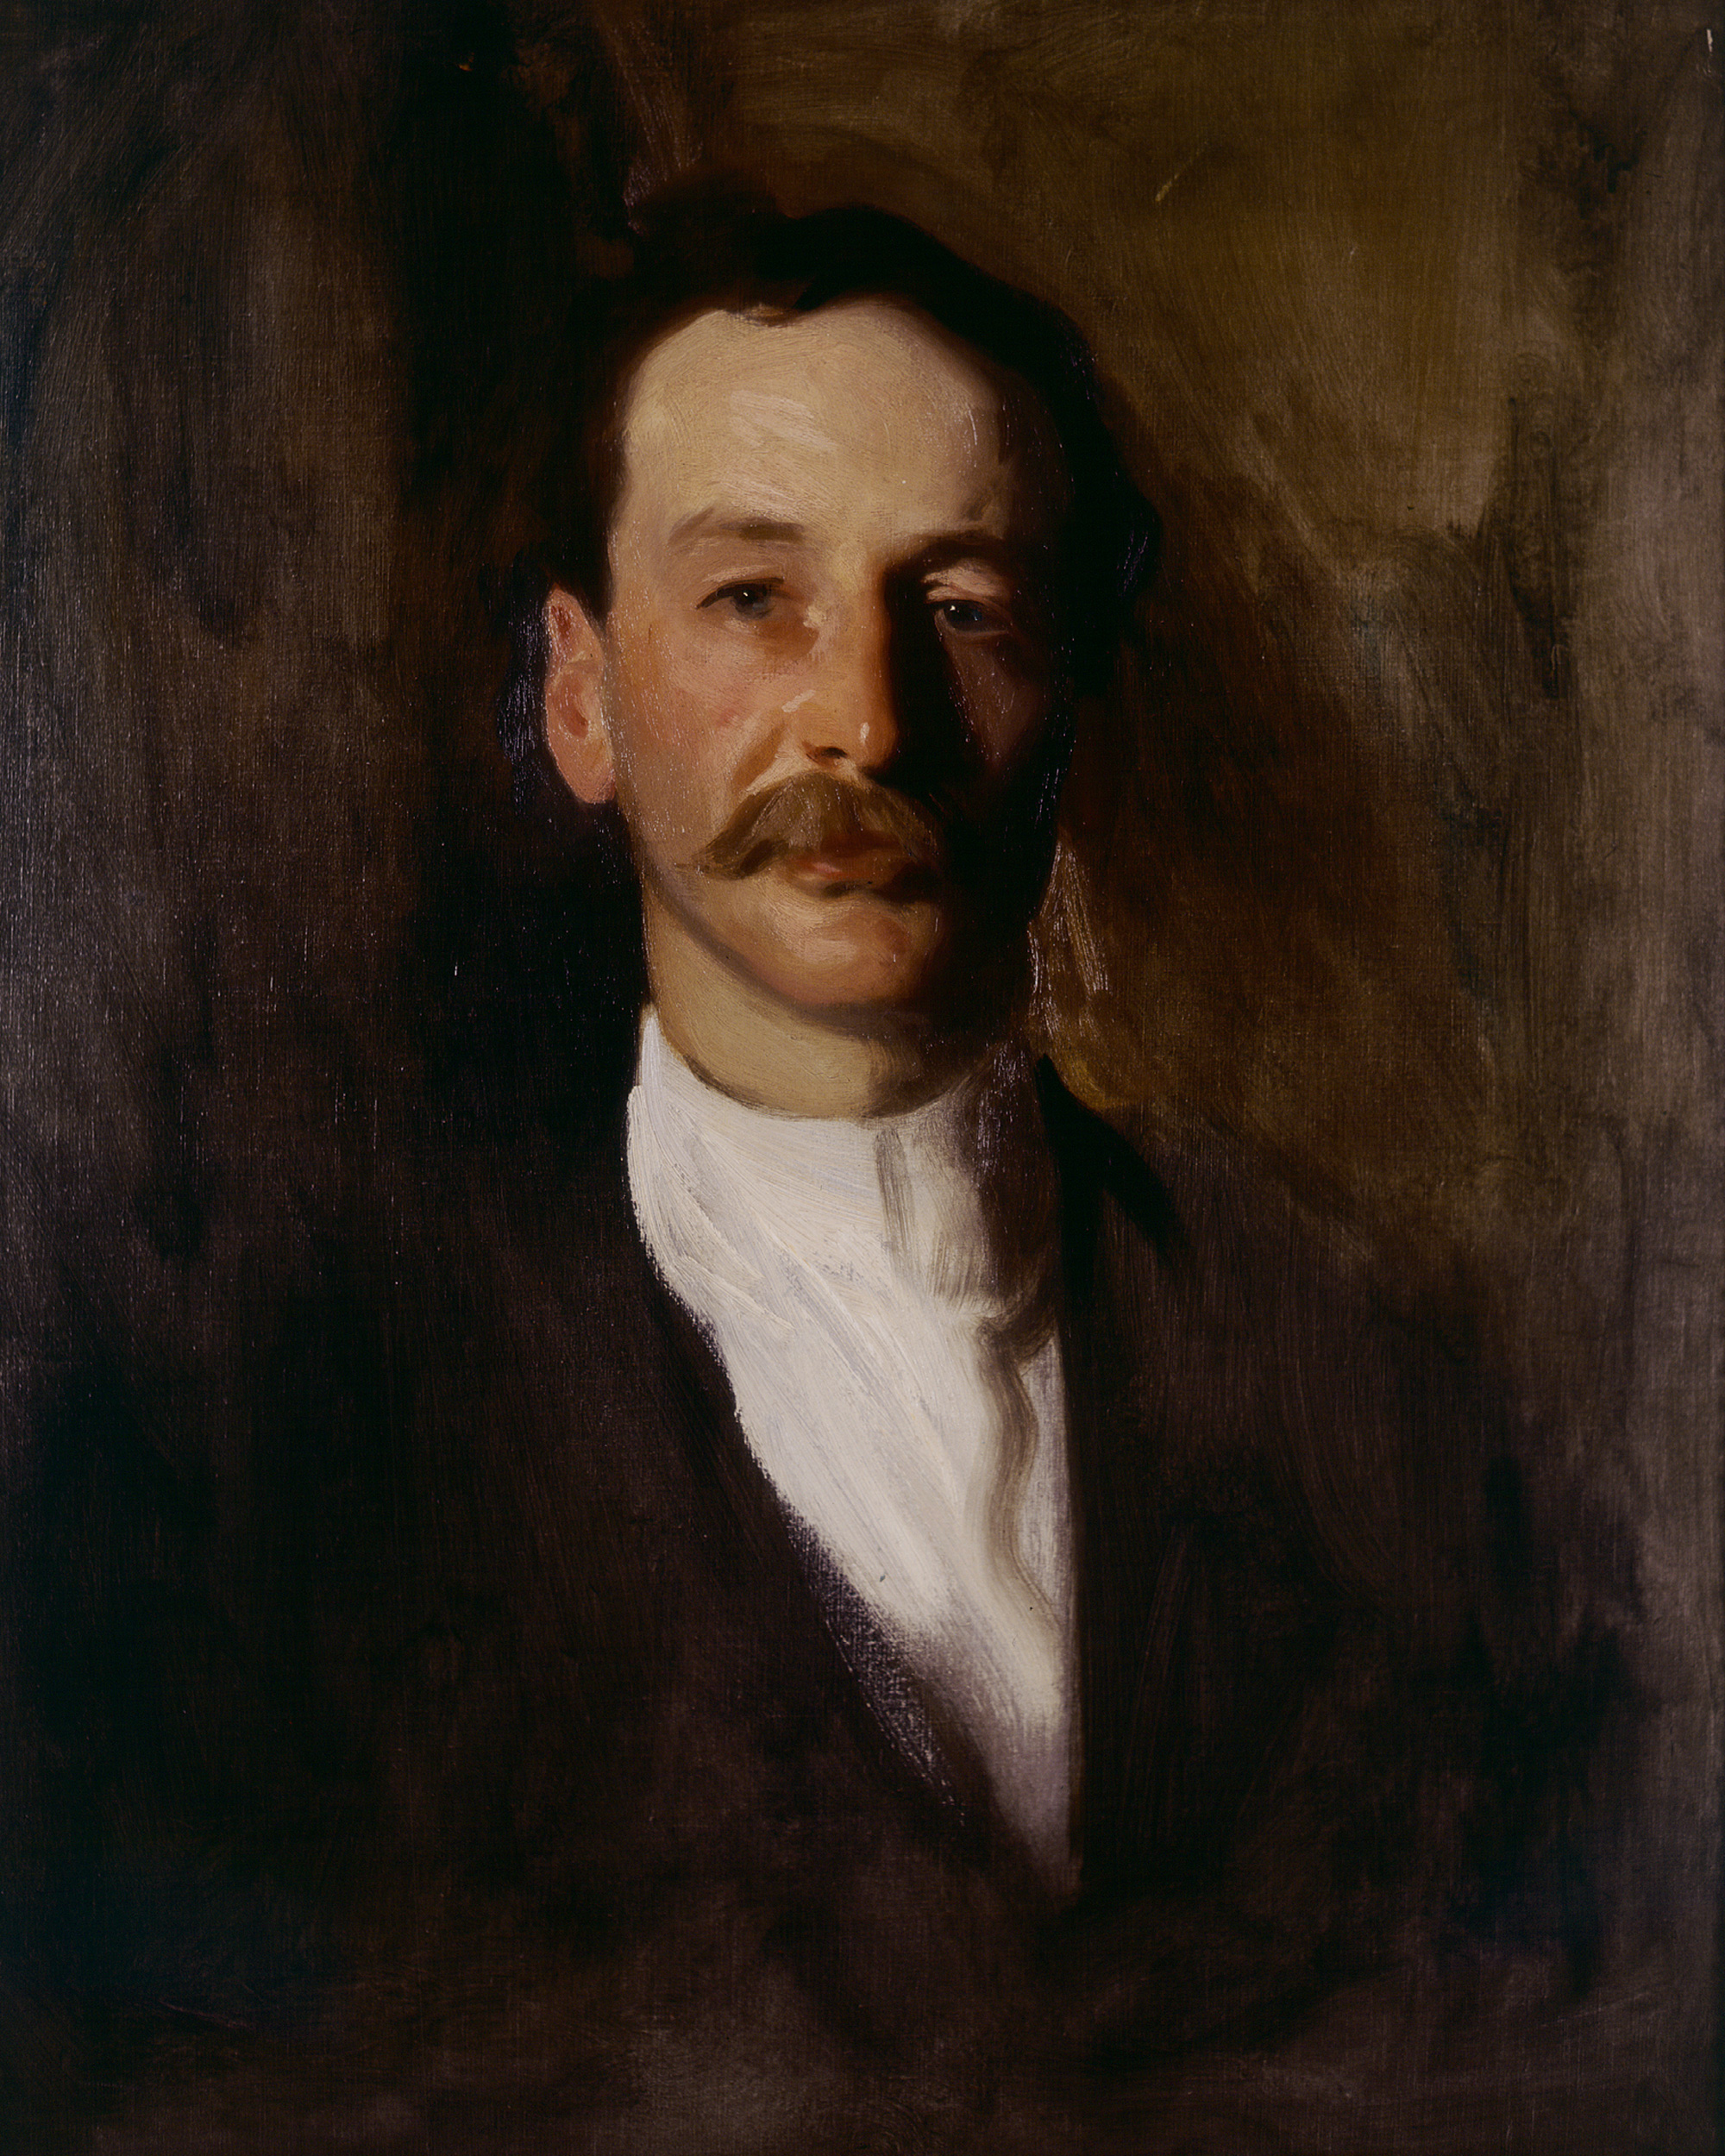 An eighteen ninety painting by John Singer Sargent titled “Dr. Morton Prince.” 